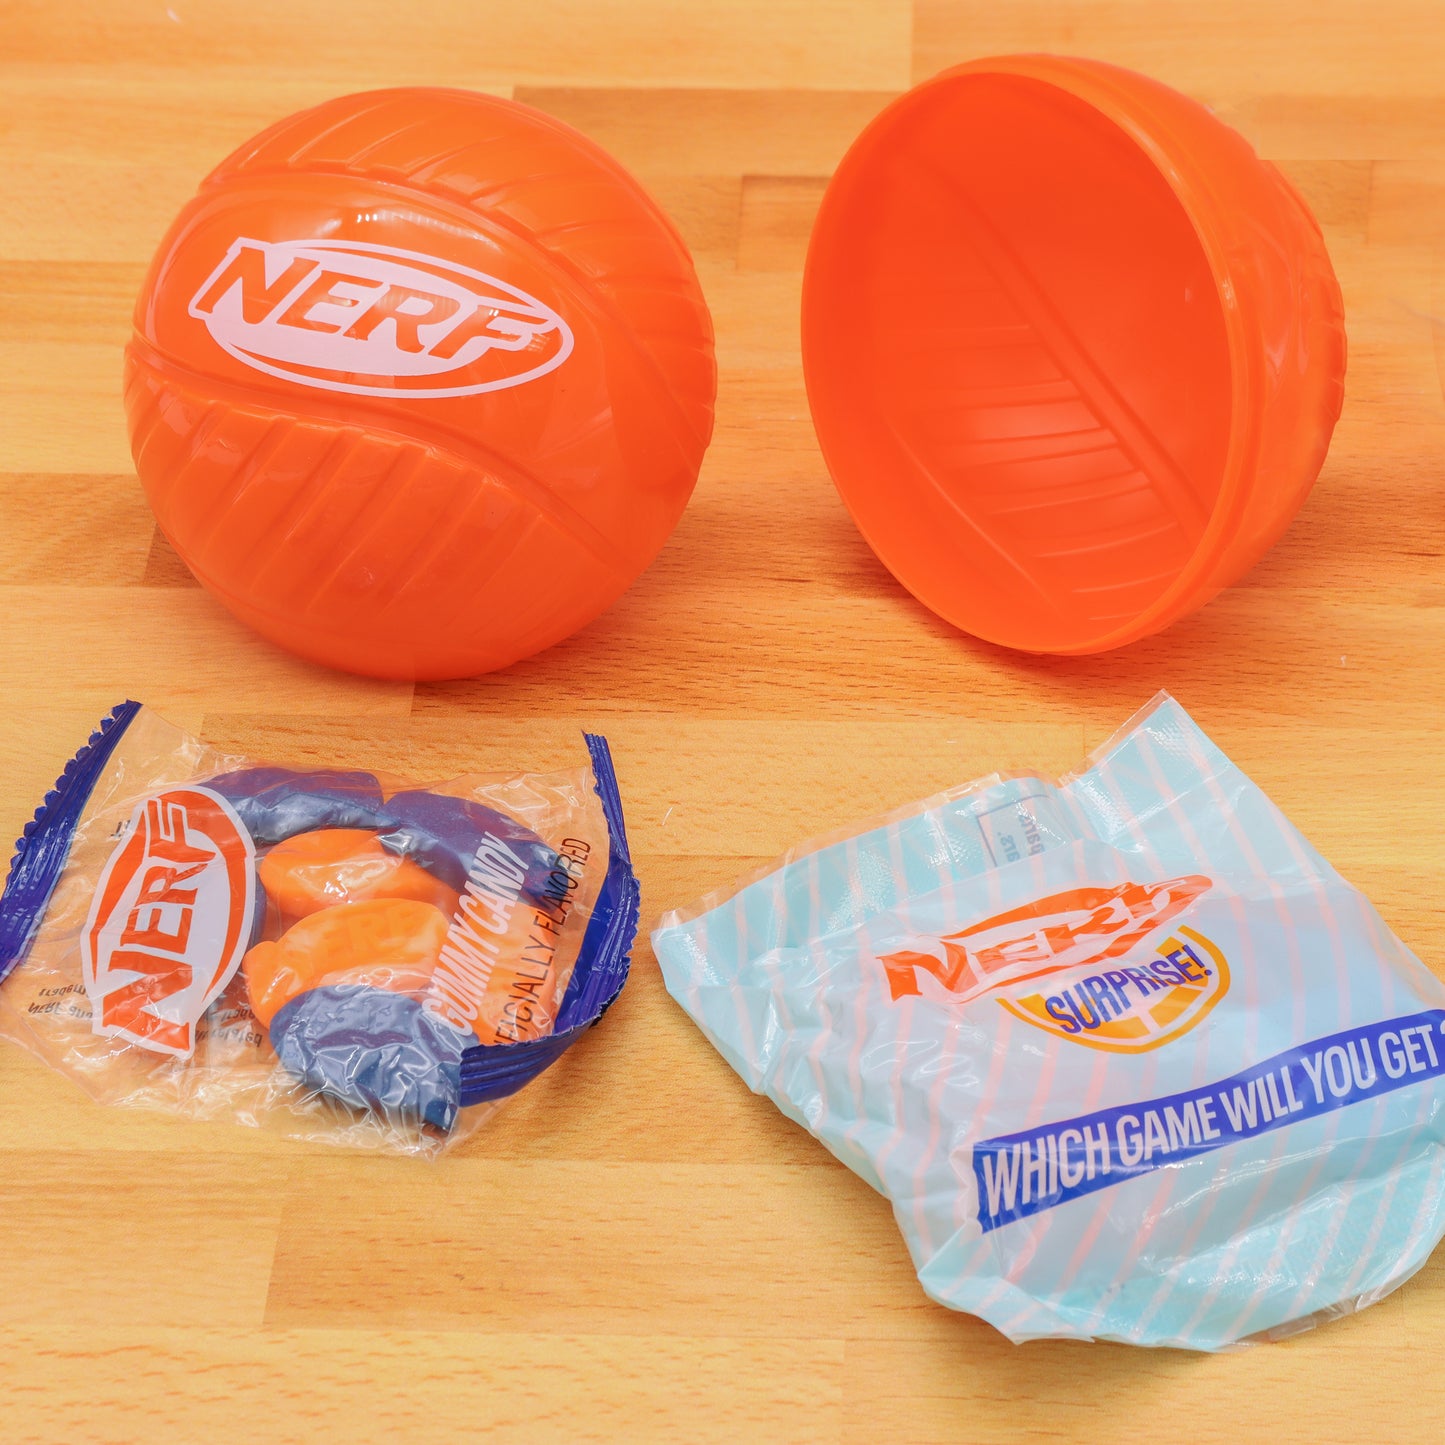 Opened orange nerf ball with bag of nerf hard candy and a blue nerf packet